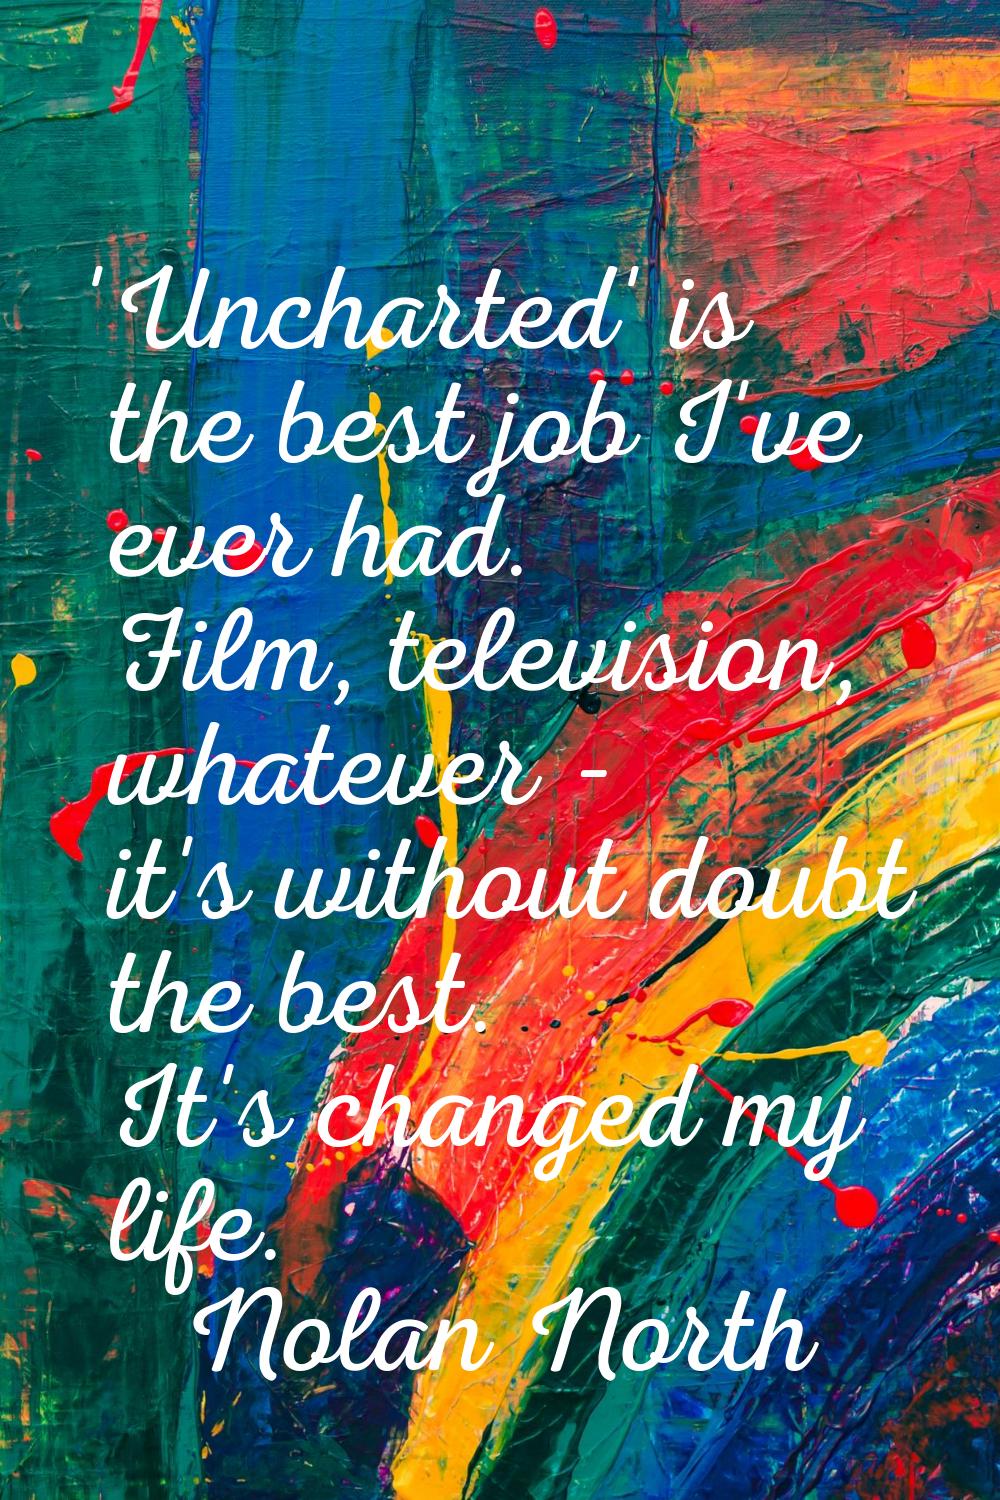 'Uncharted' is the best job I've ever had. Film, television, whatever - it's without doubt the best